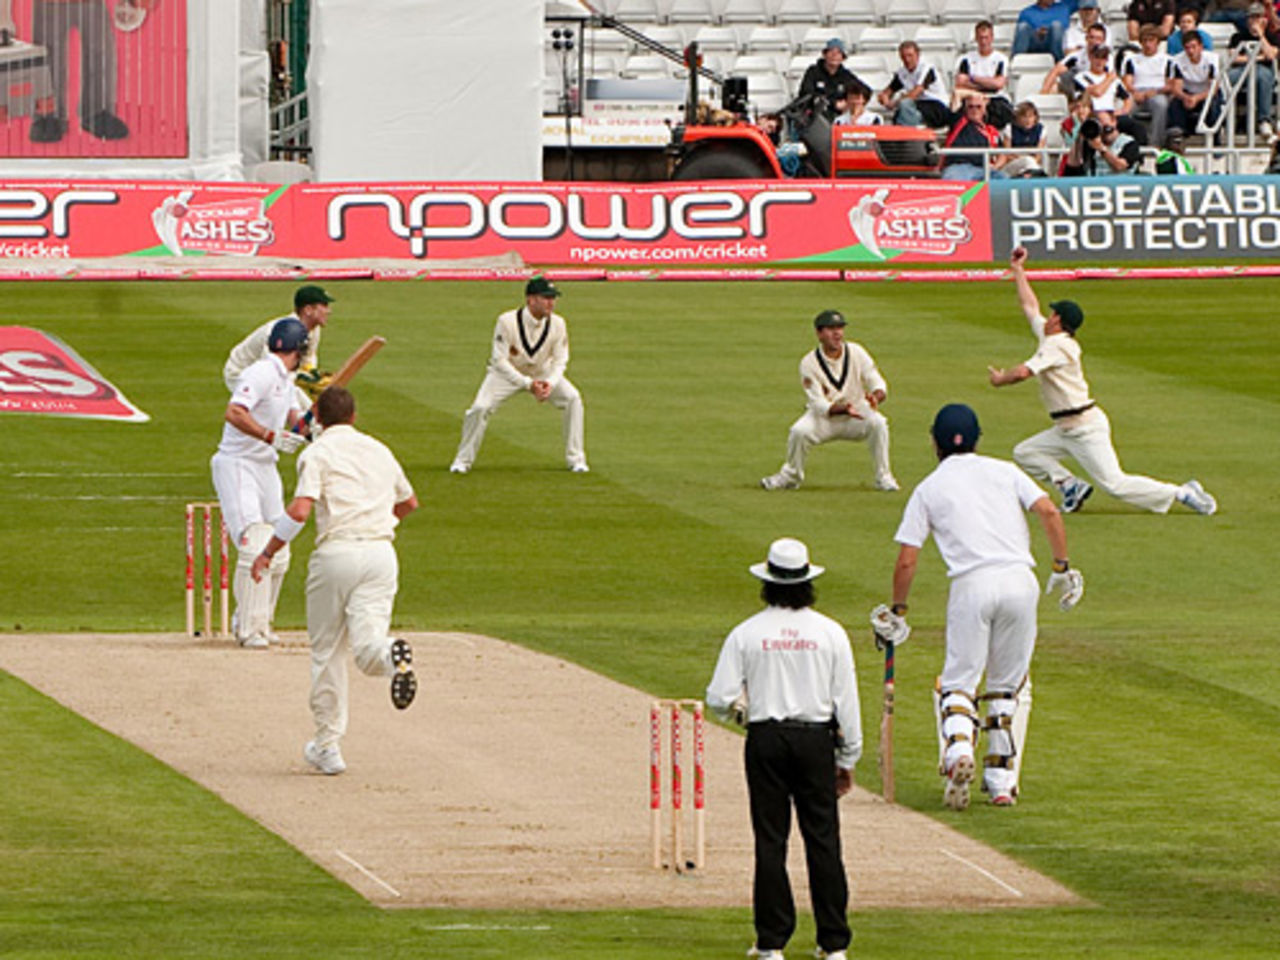 Marcus North's superb one-handed catch to send Andrew Strauss back to the pavilion, England v Australia, 4th Test, Headingley, 1st day, August 7, 2009